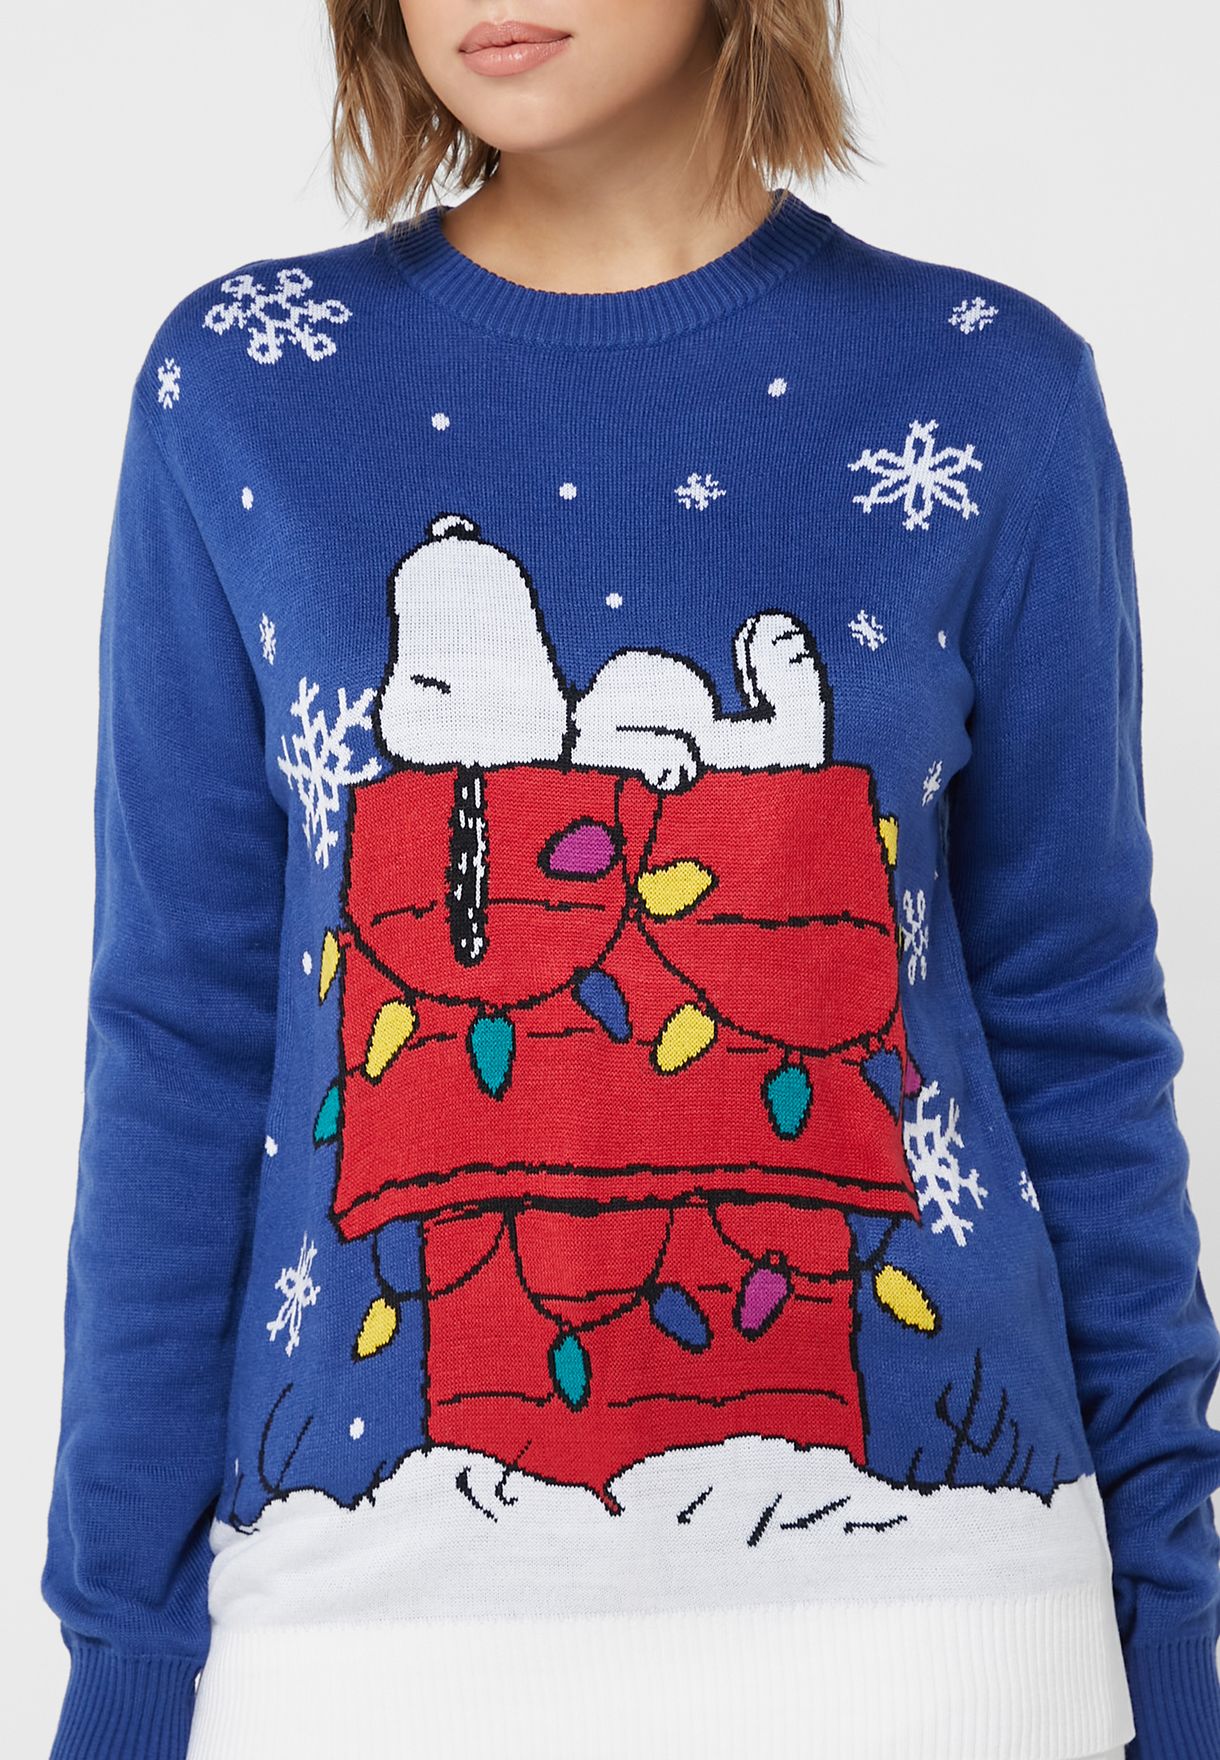 Snoopy Print Knitted Sweater